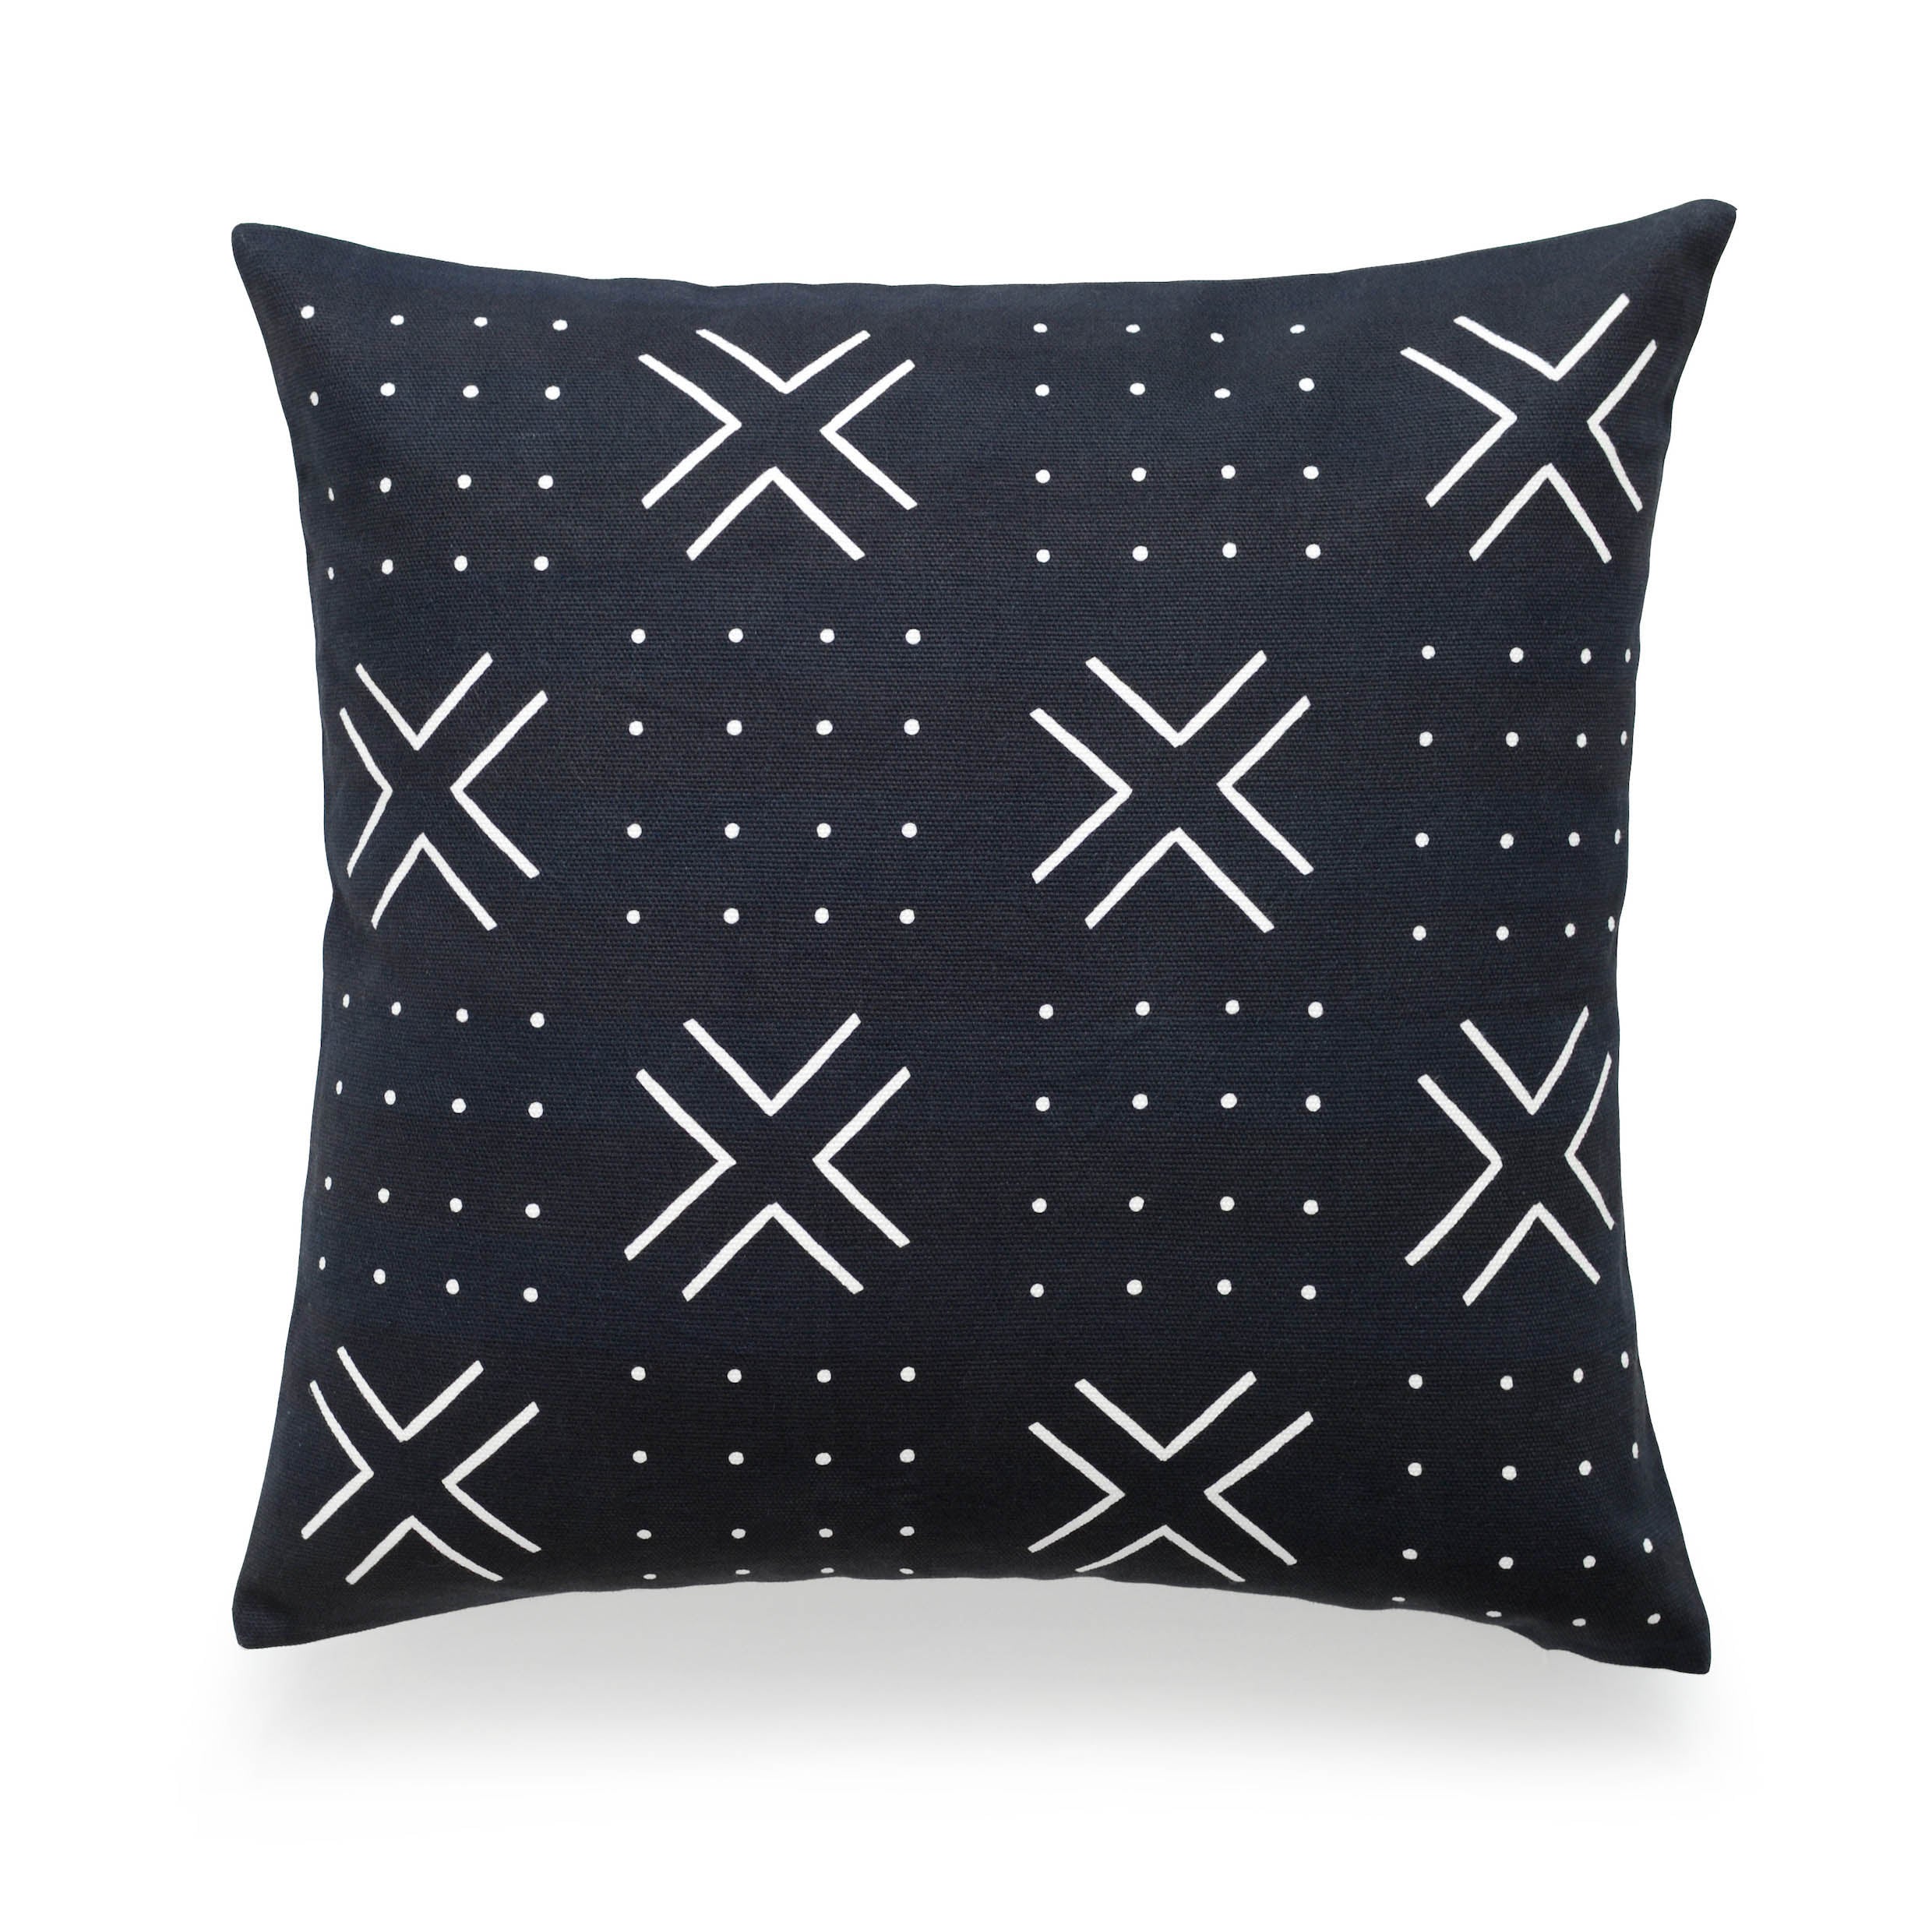 African Mud Cloth Pillow Cover, X Dots, Black, 18"x18"